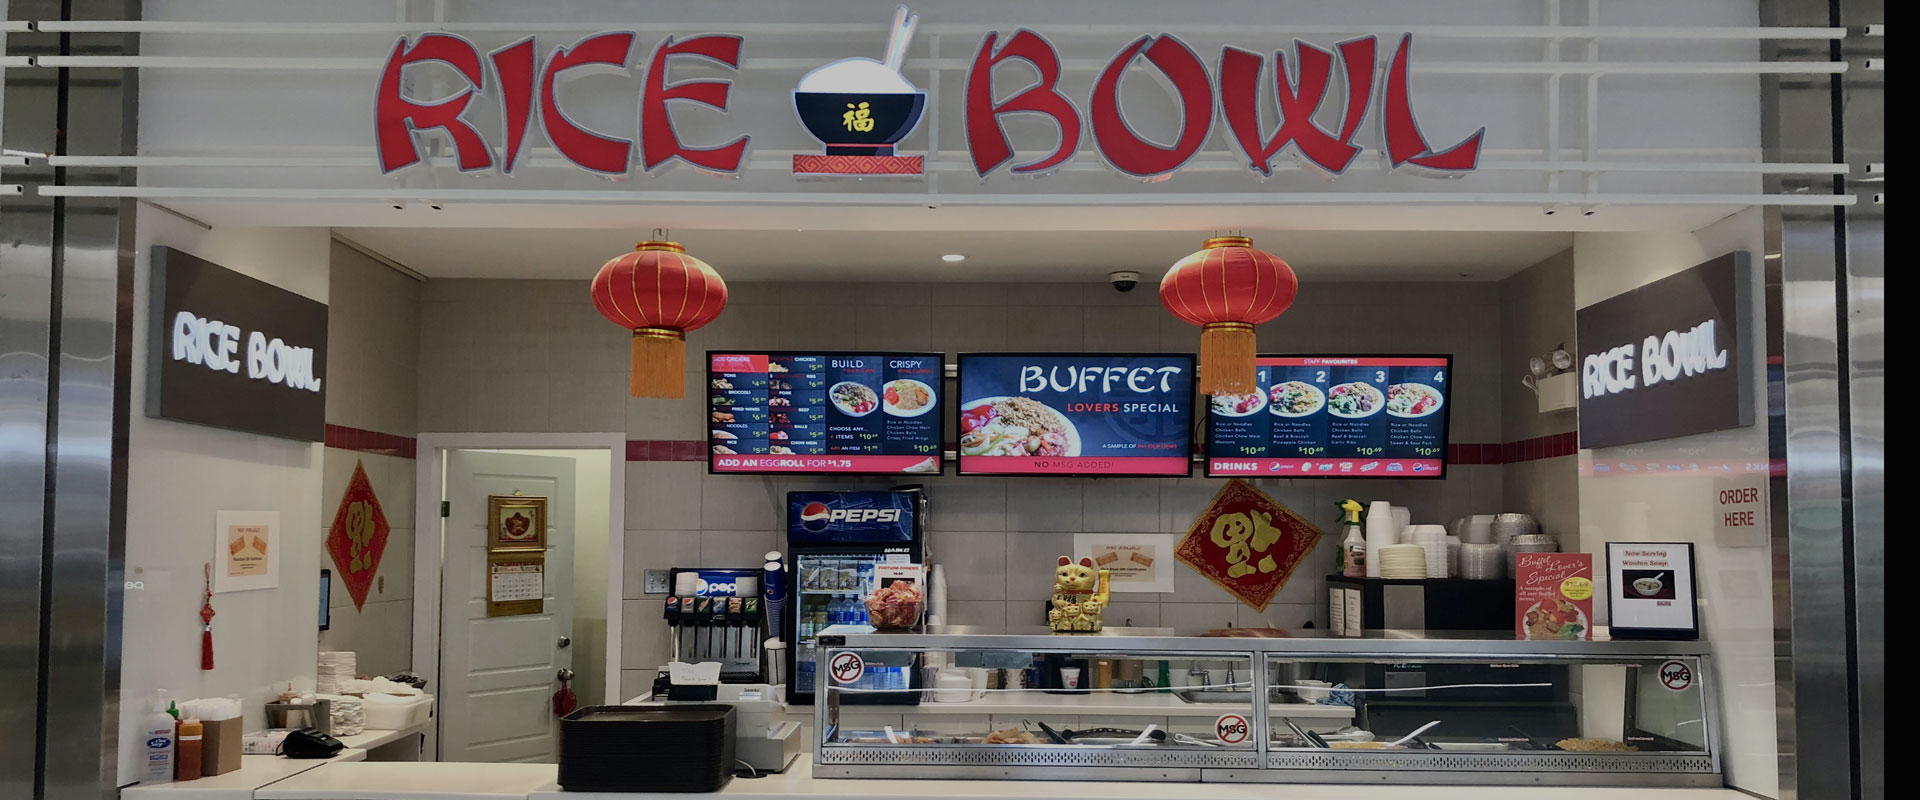 Welcome To The Rice Bowl